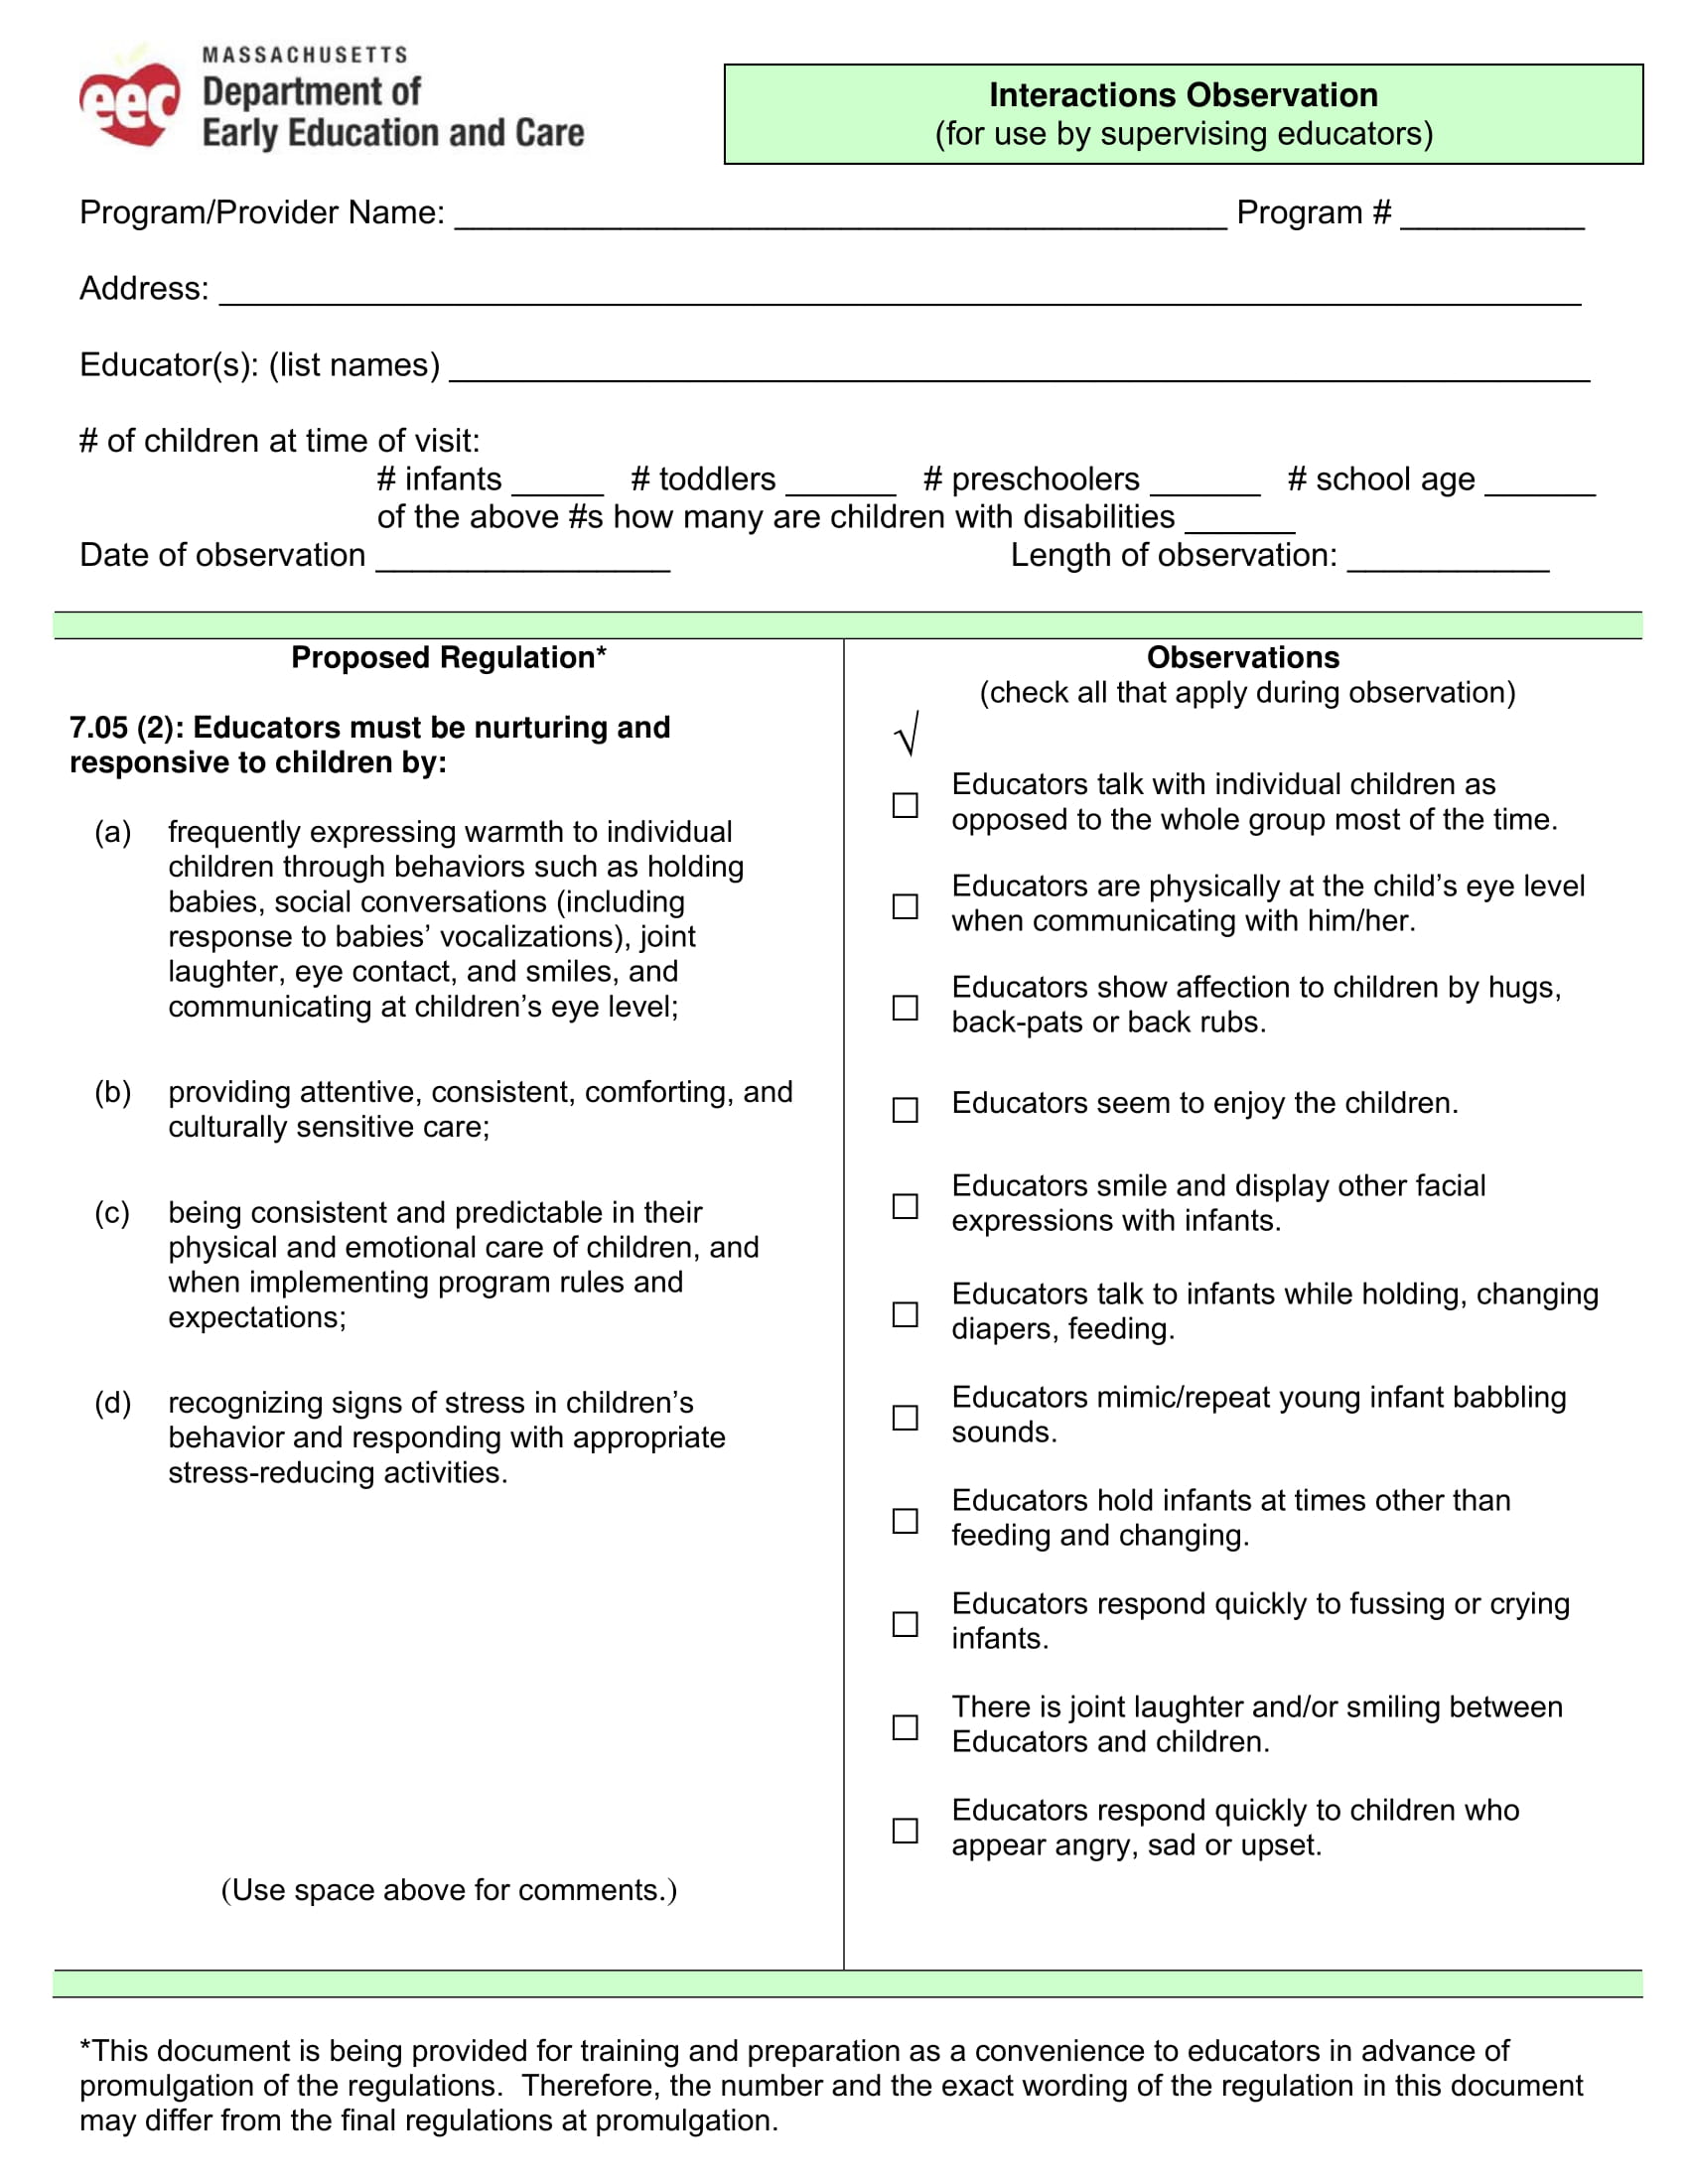 child care interactions observation form 1